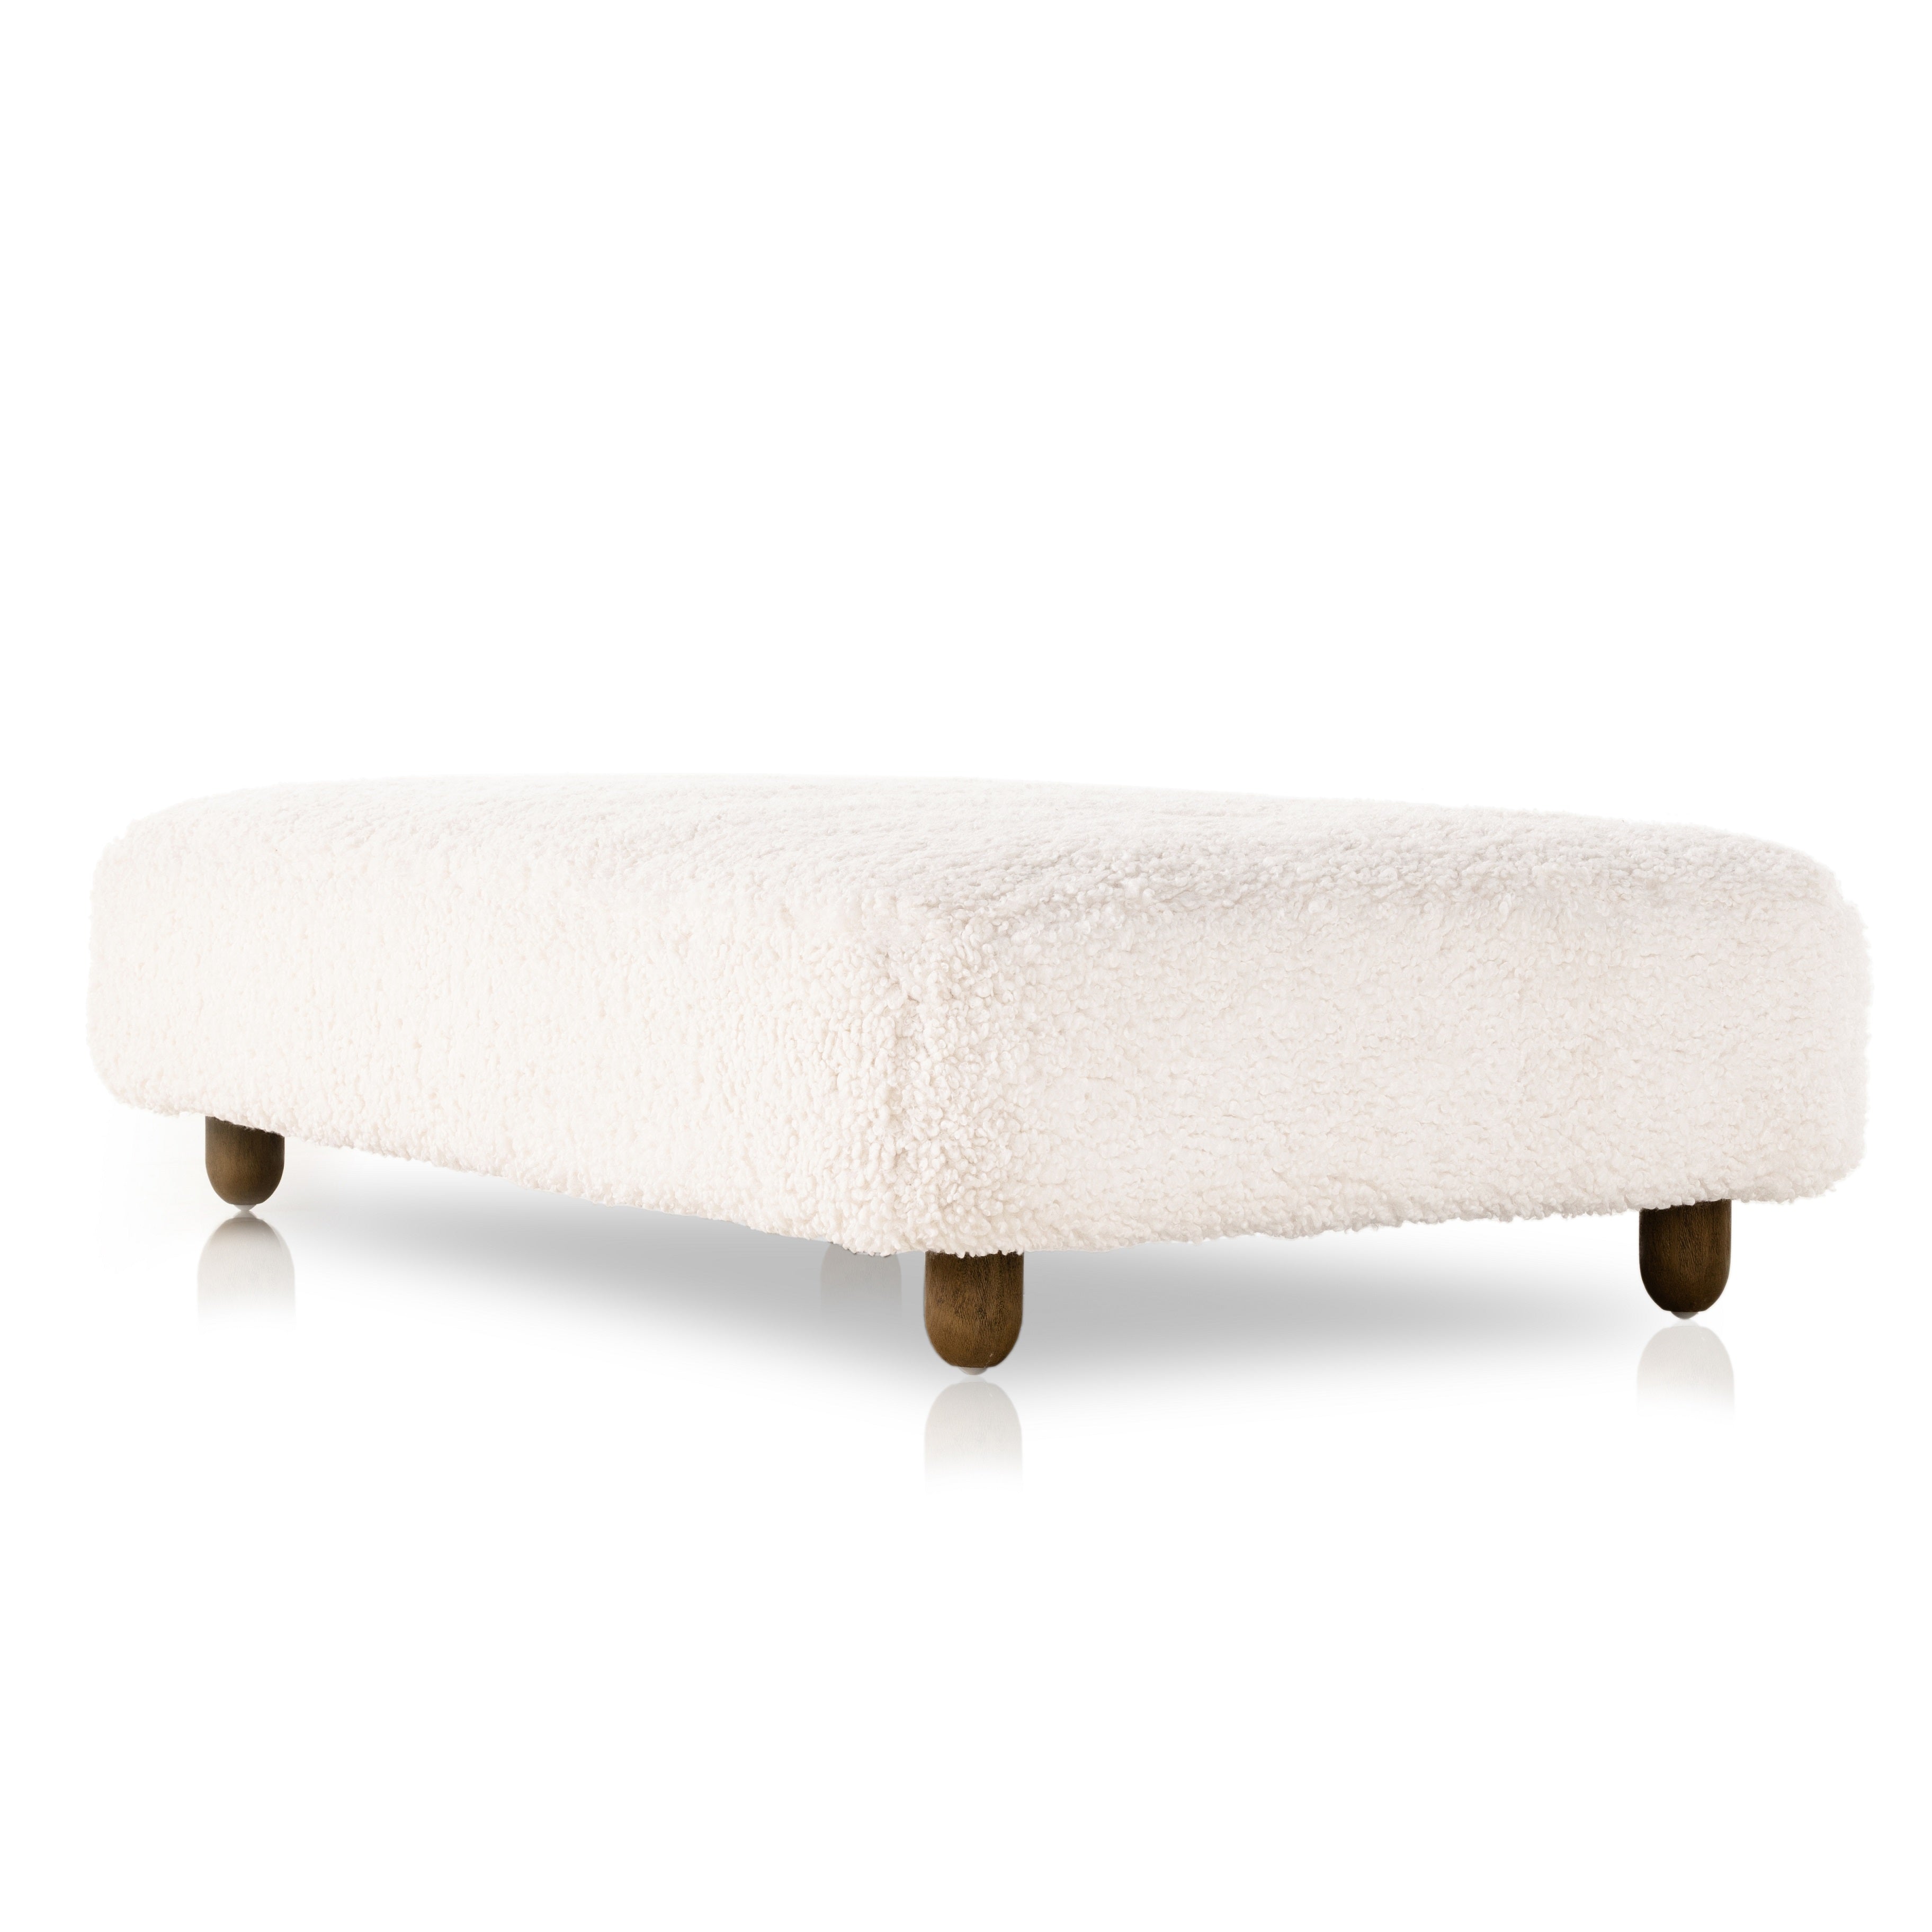 Place this Aniston Andes Natural Rectangle Ottoman just about anywhere for a subtle retro vibe. Upholstered in a faux Mongolian shearling with a high pile fur. Parawood legs are wirebrushed for a warm, vintage feel. Amethyst Home provides interior design services, furniture, rugs, and lighting in the Calabasas metro area.